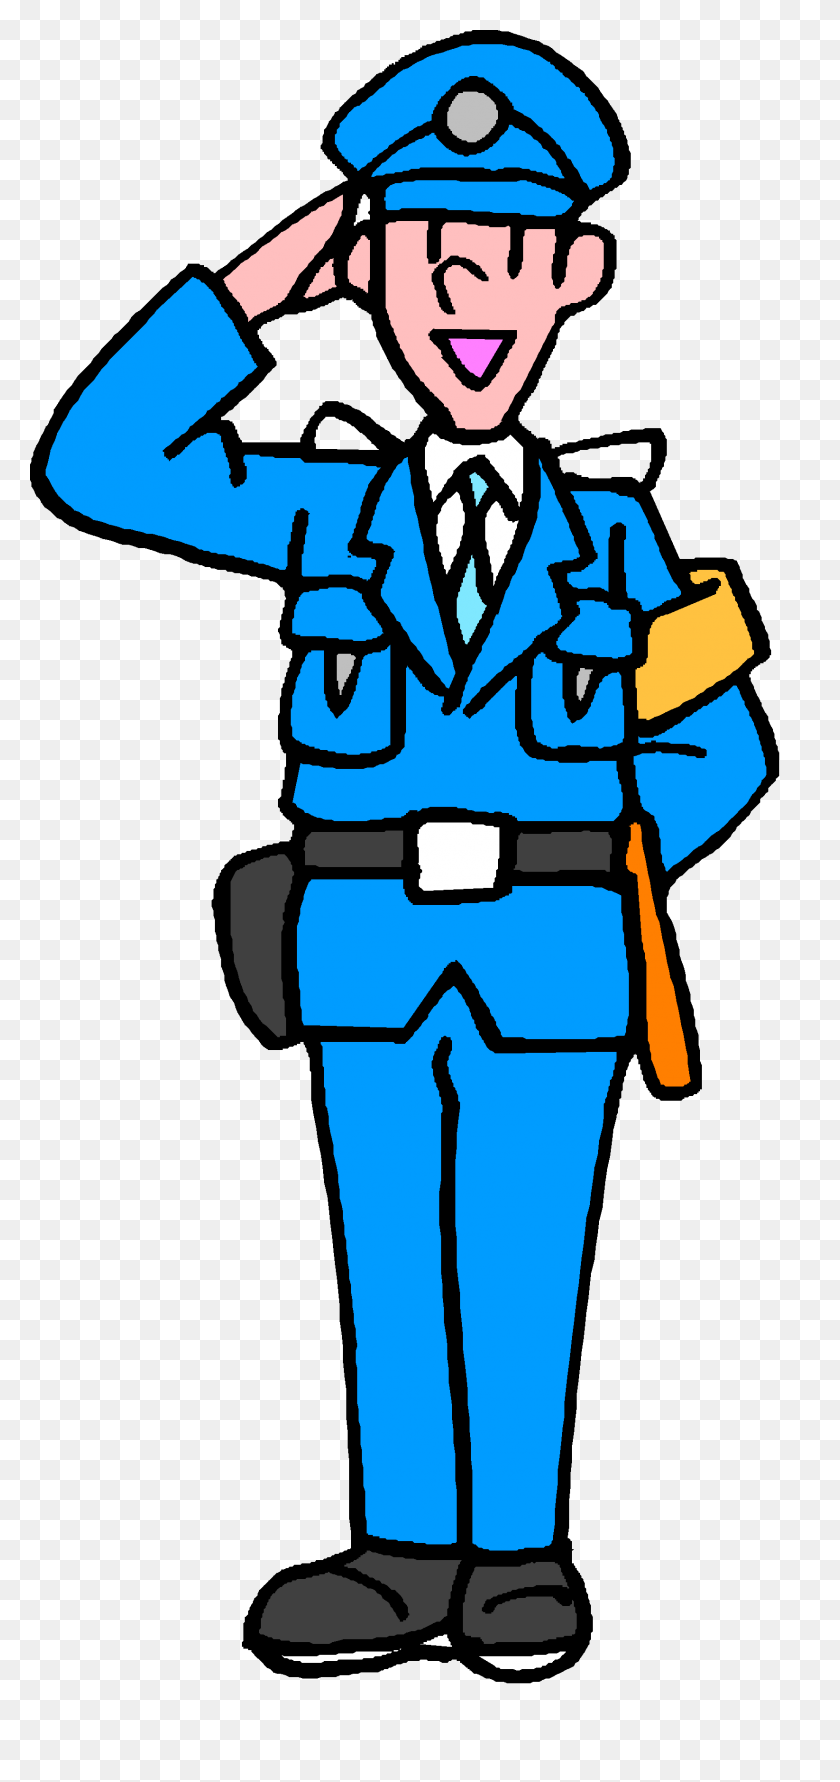 1645x3633 Airport Security Check Clip Art - Security Guard Clipart